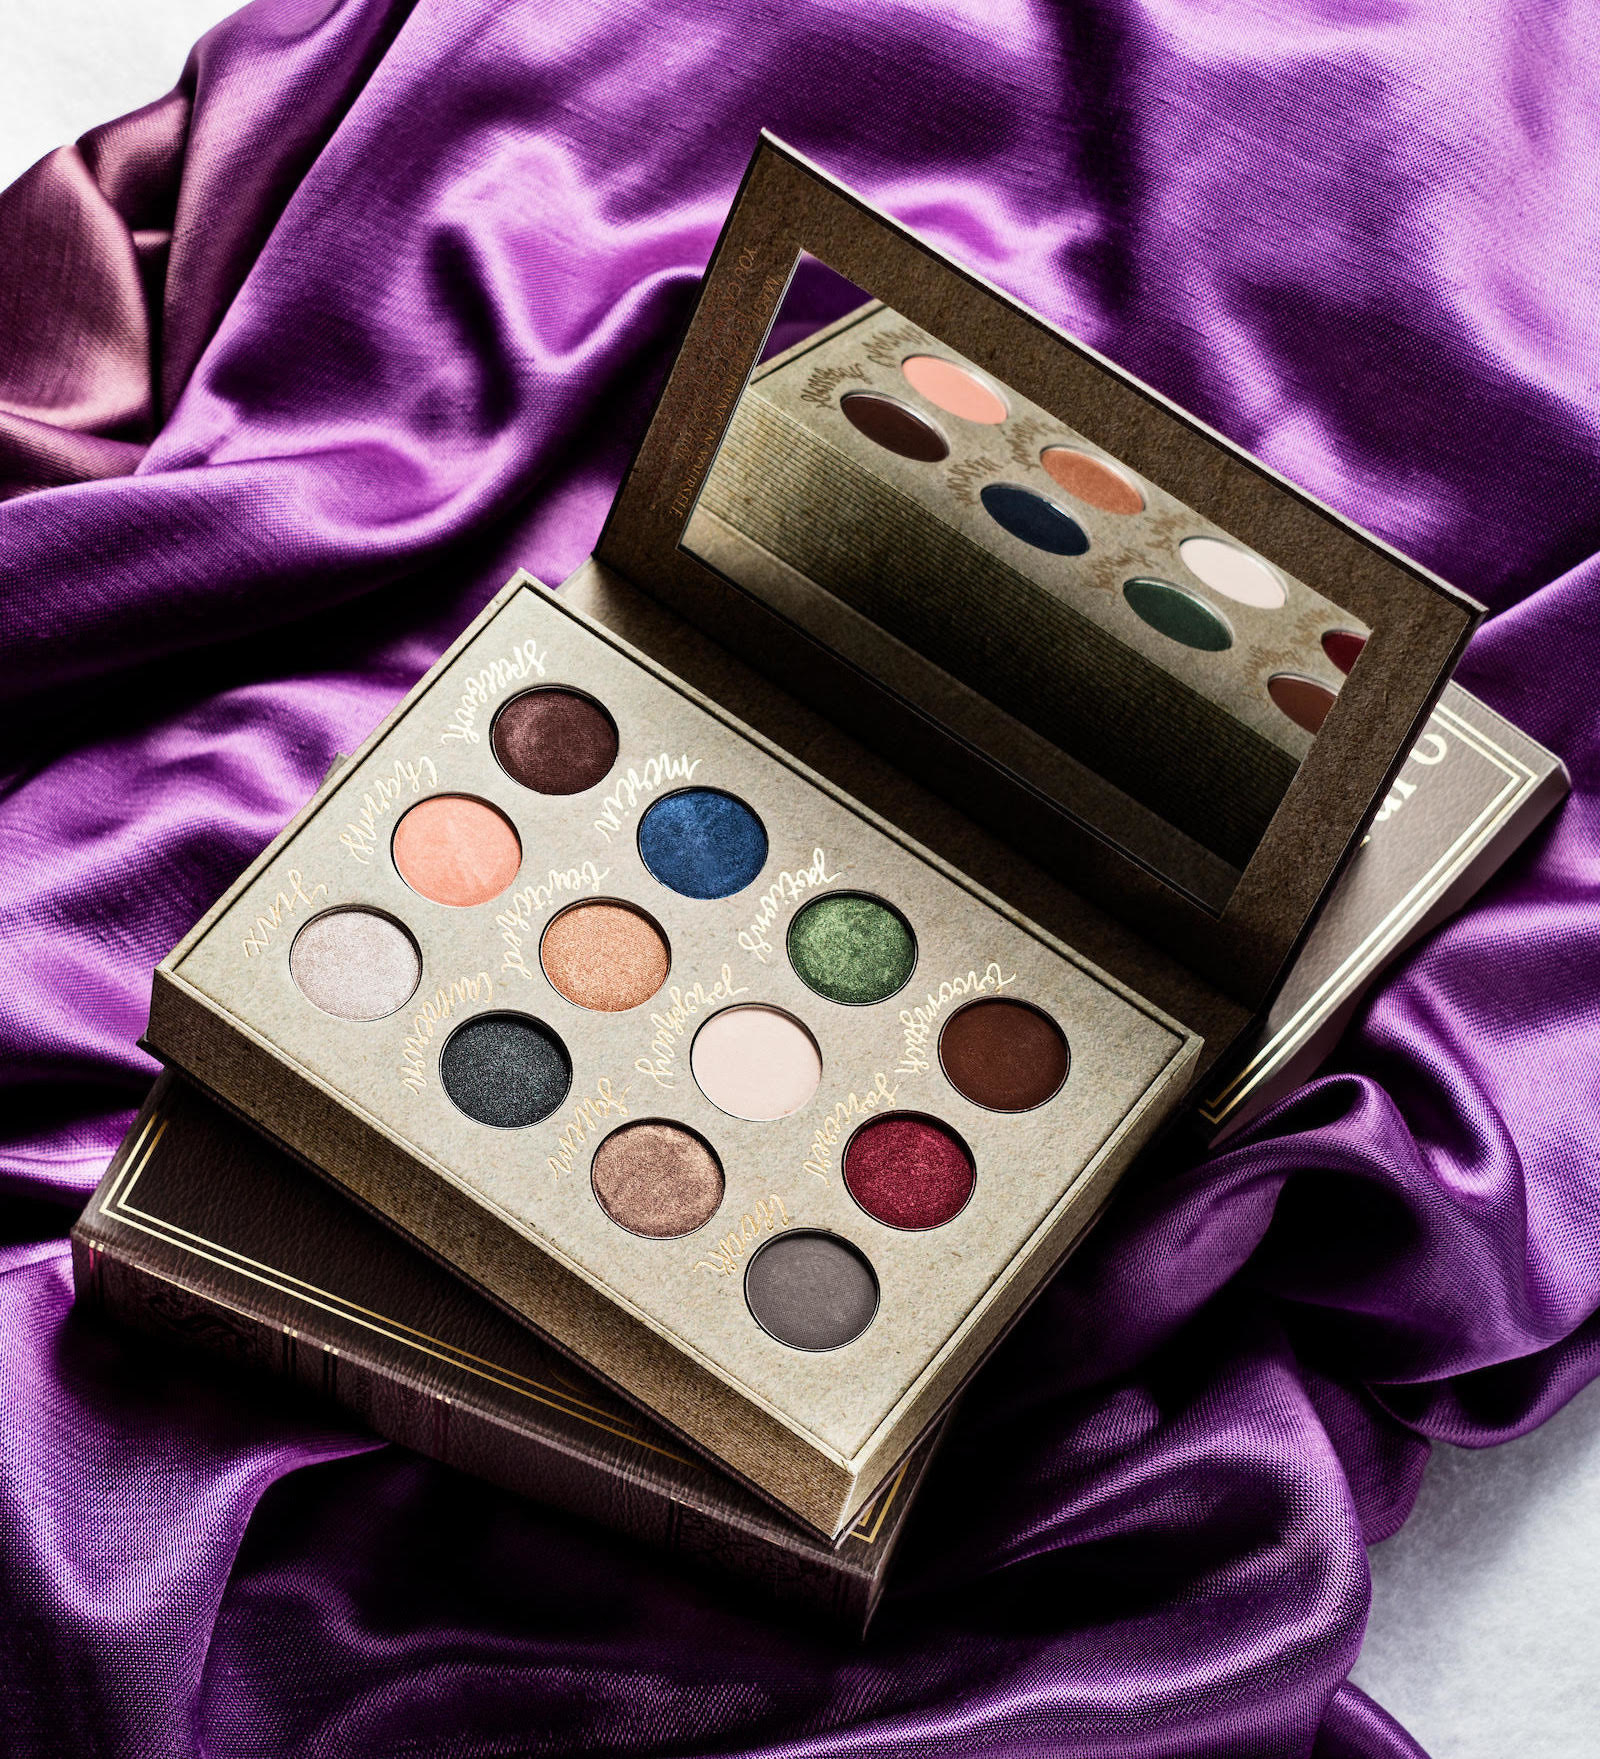 Magic eyeshadow. Палетка теней Wizardry and Witchcraft Palette. Storybook Cosmetics Wizardry and Witchcraft.